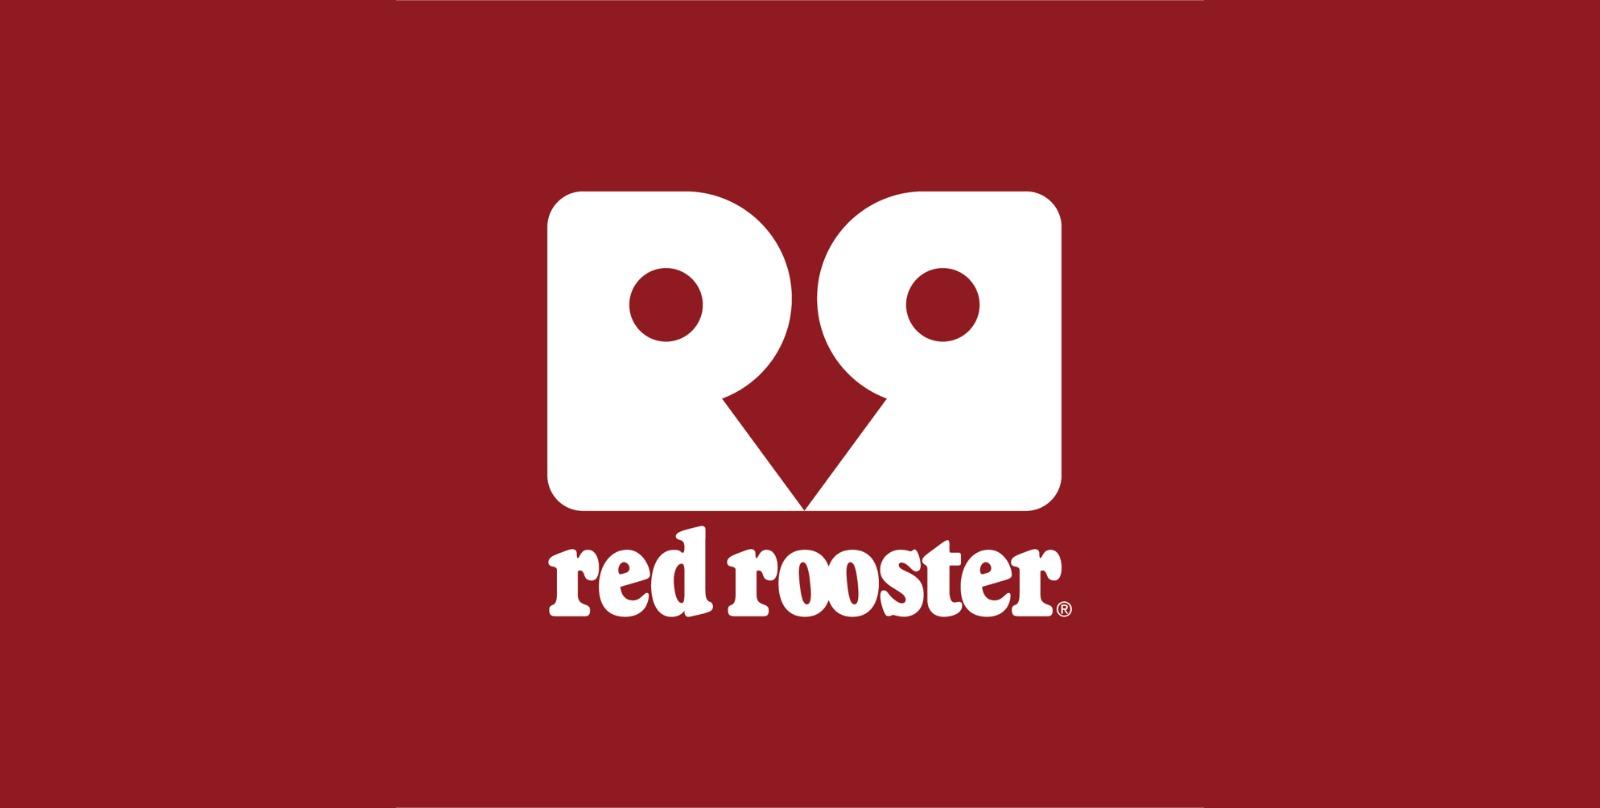 red rooster menu prices australia